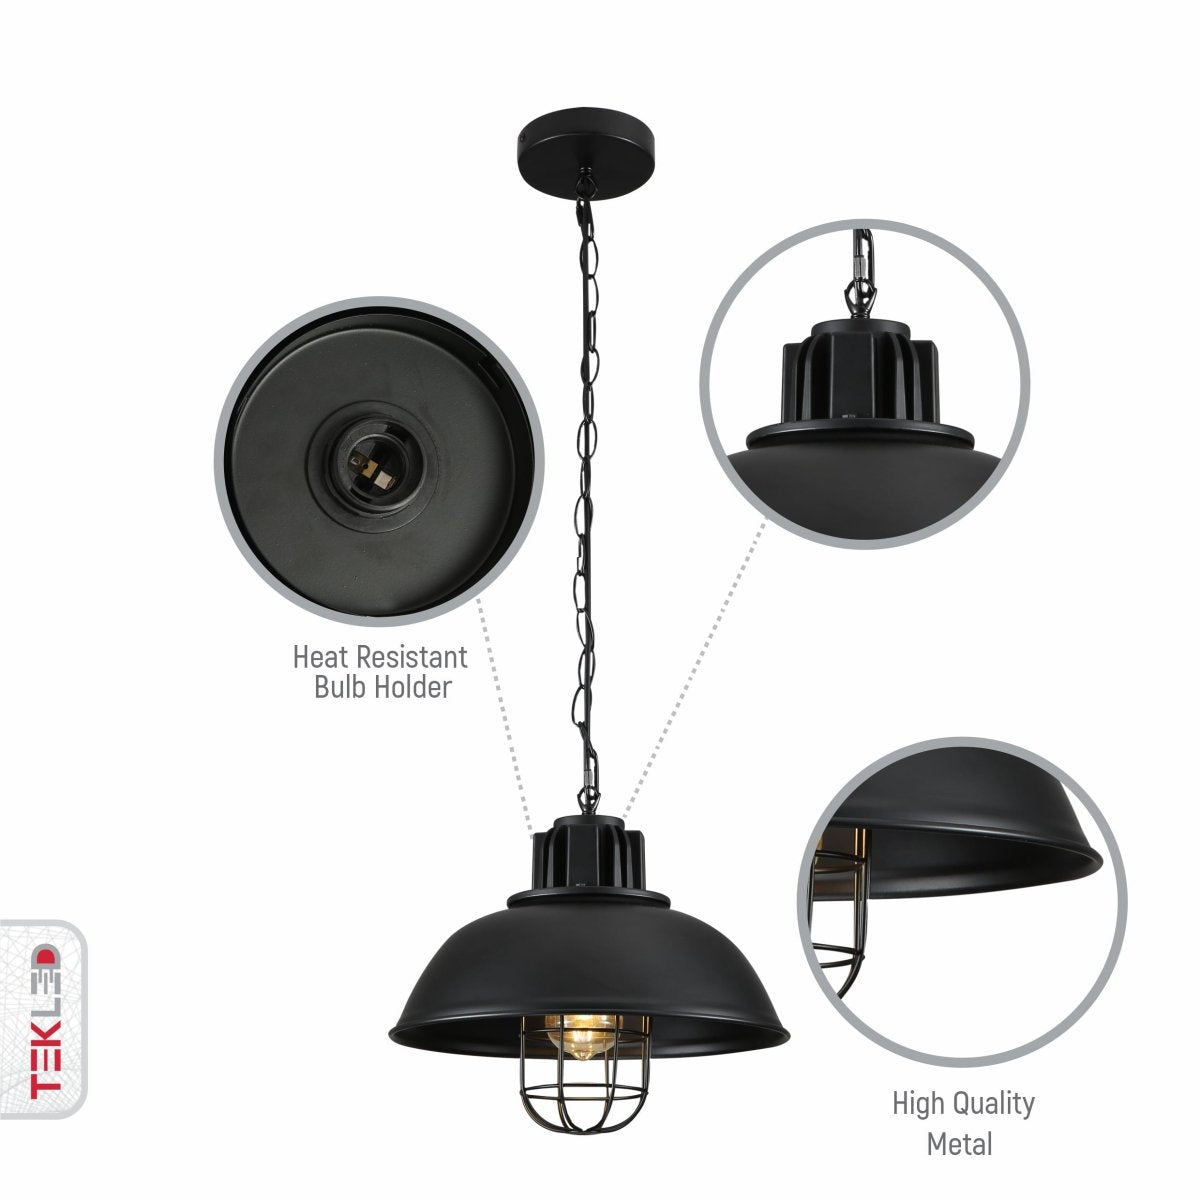 Close up shots of Black Dome Caged Industrial Metal Ceiling Pendant Light with E27 Fitting | TEKLED 150-18352